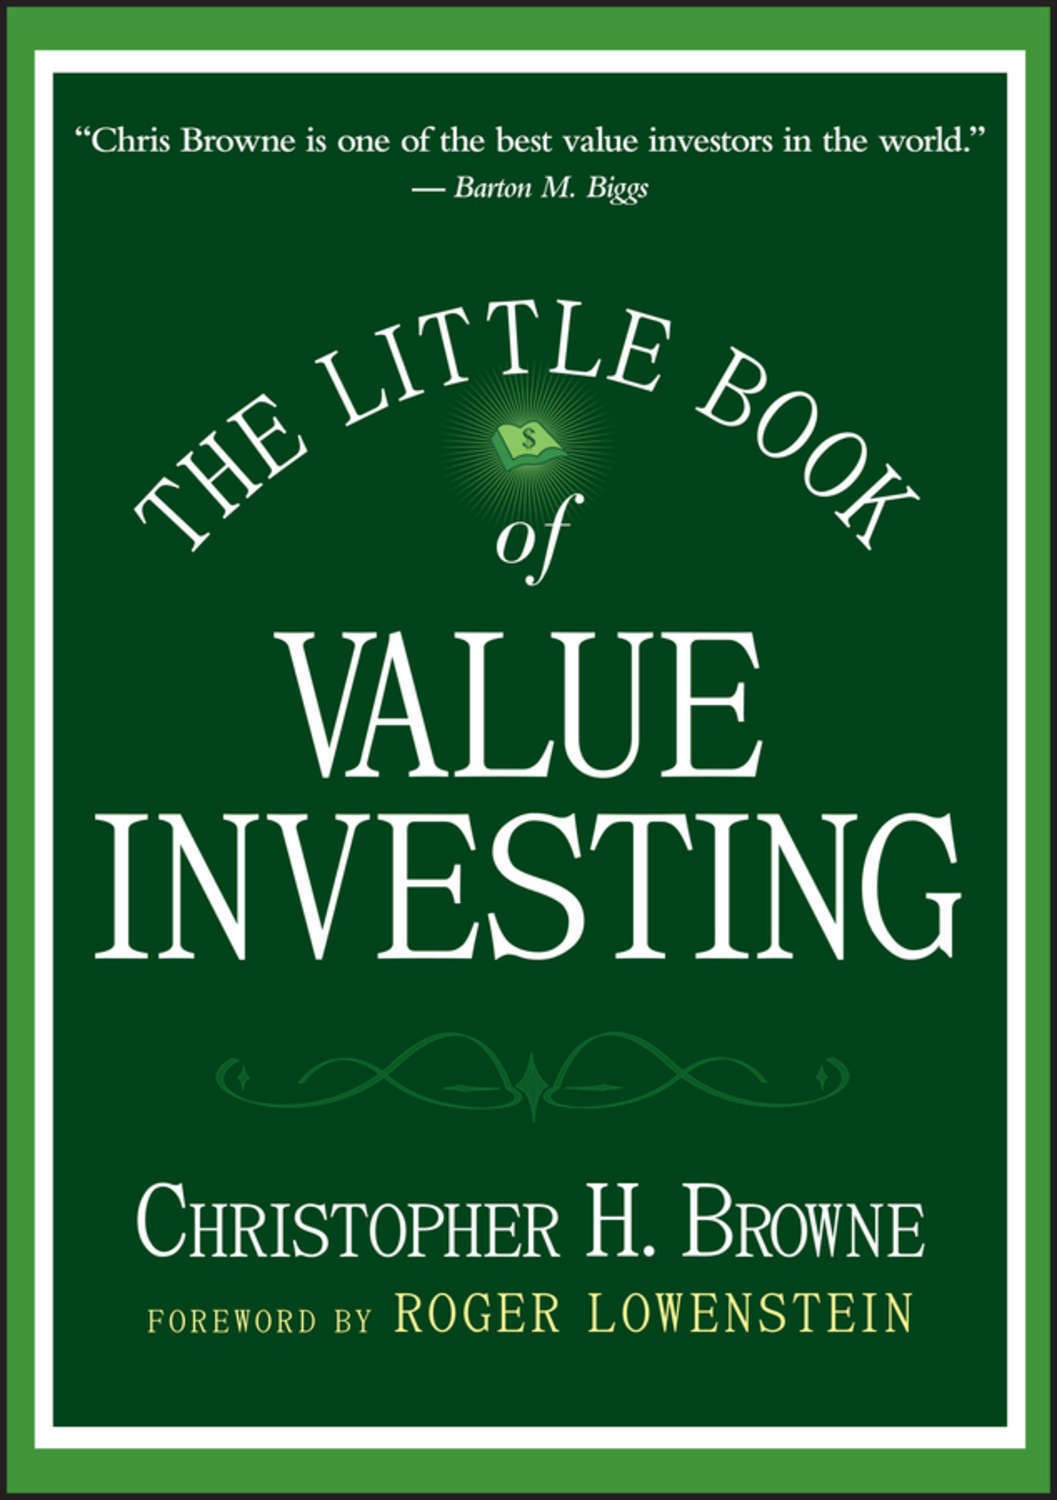 Little book value investing forex gambit strategy